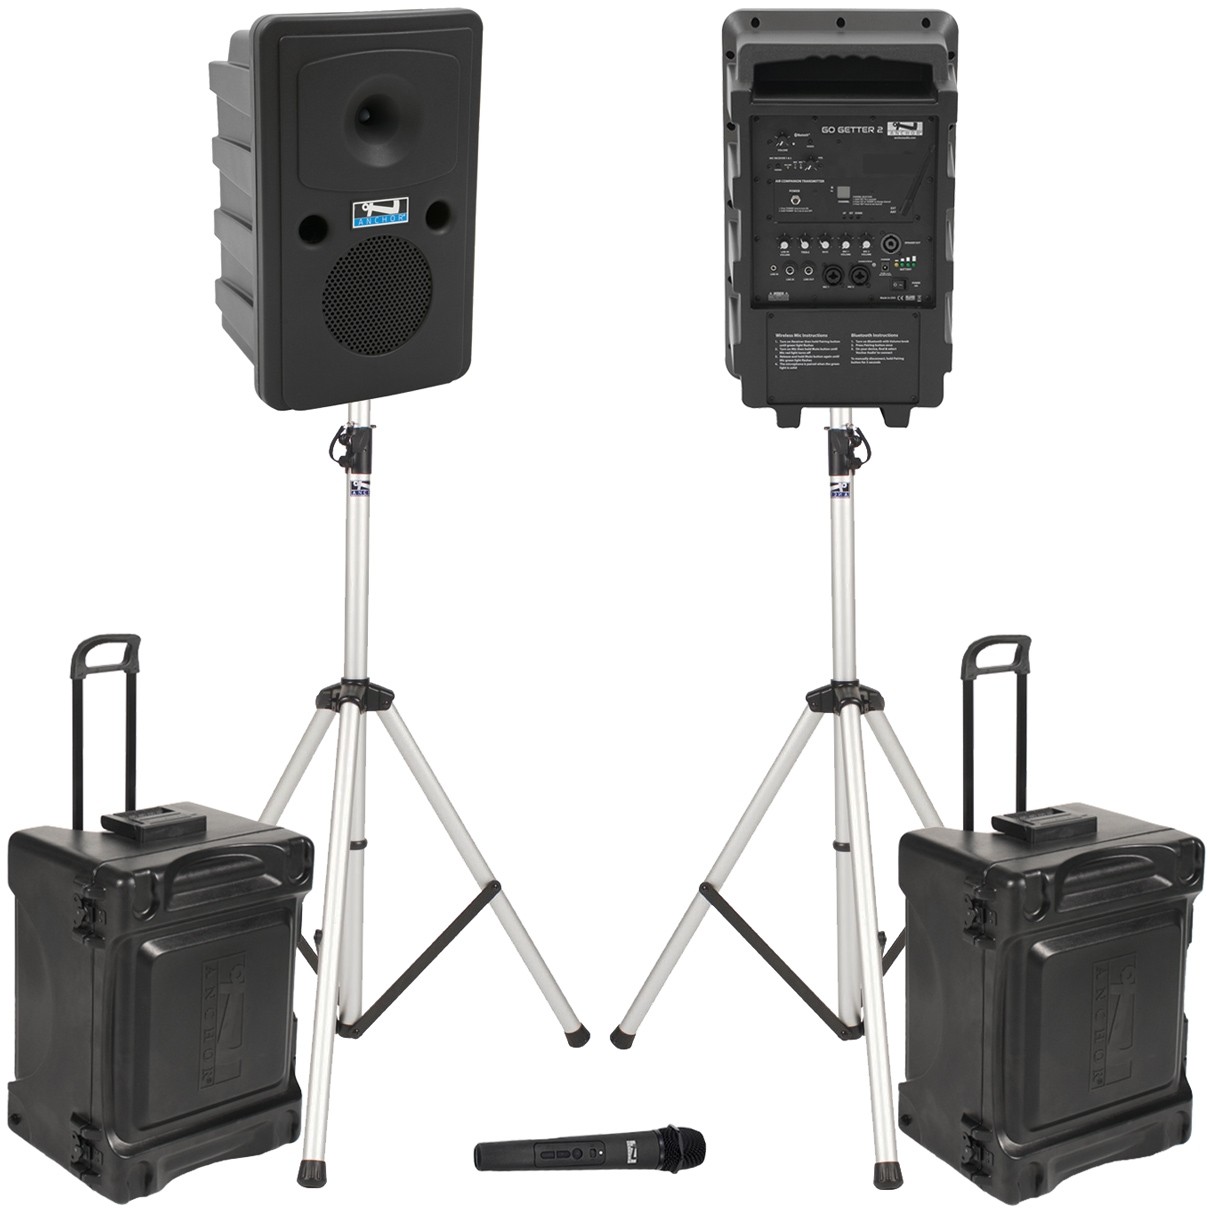 Portable Stadium Sound System with 2 Wireless Bluetooth Speakers and Wireless Microphone